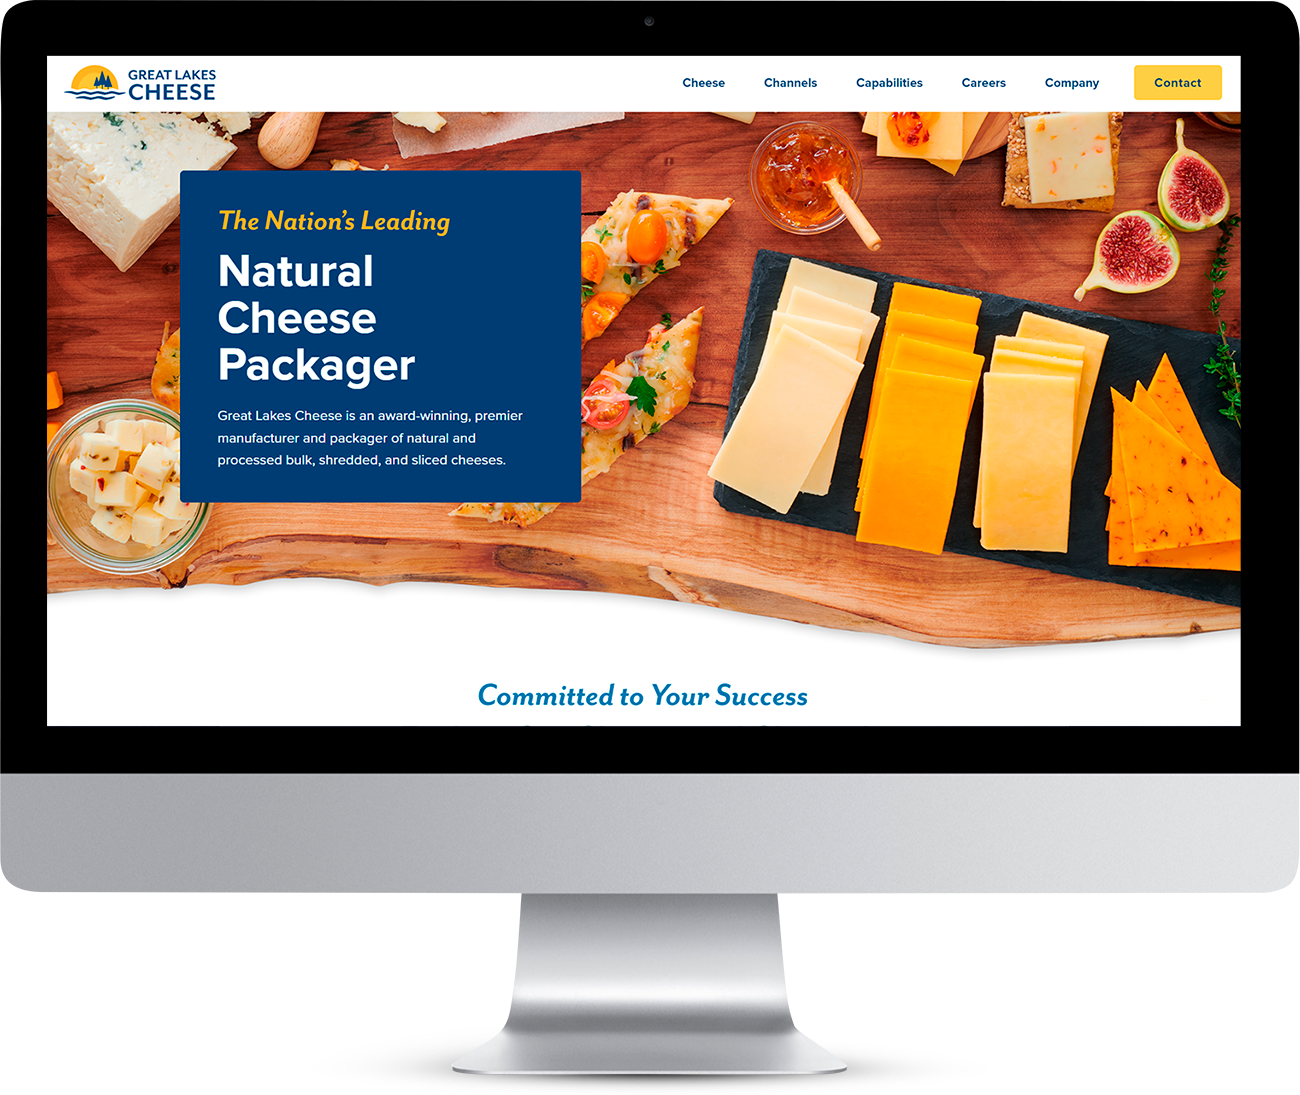 Computer monitor displaying the Great Lakes Cheese website, which showcases slices of cheese, jam, and fruit and the heading: The Nation’s Leading Natural Cheese Packager.